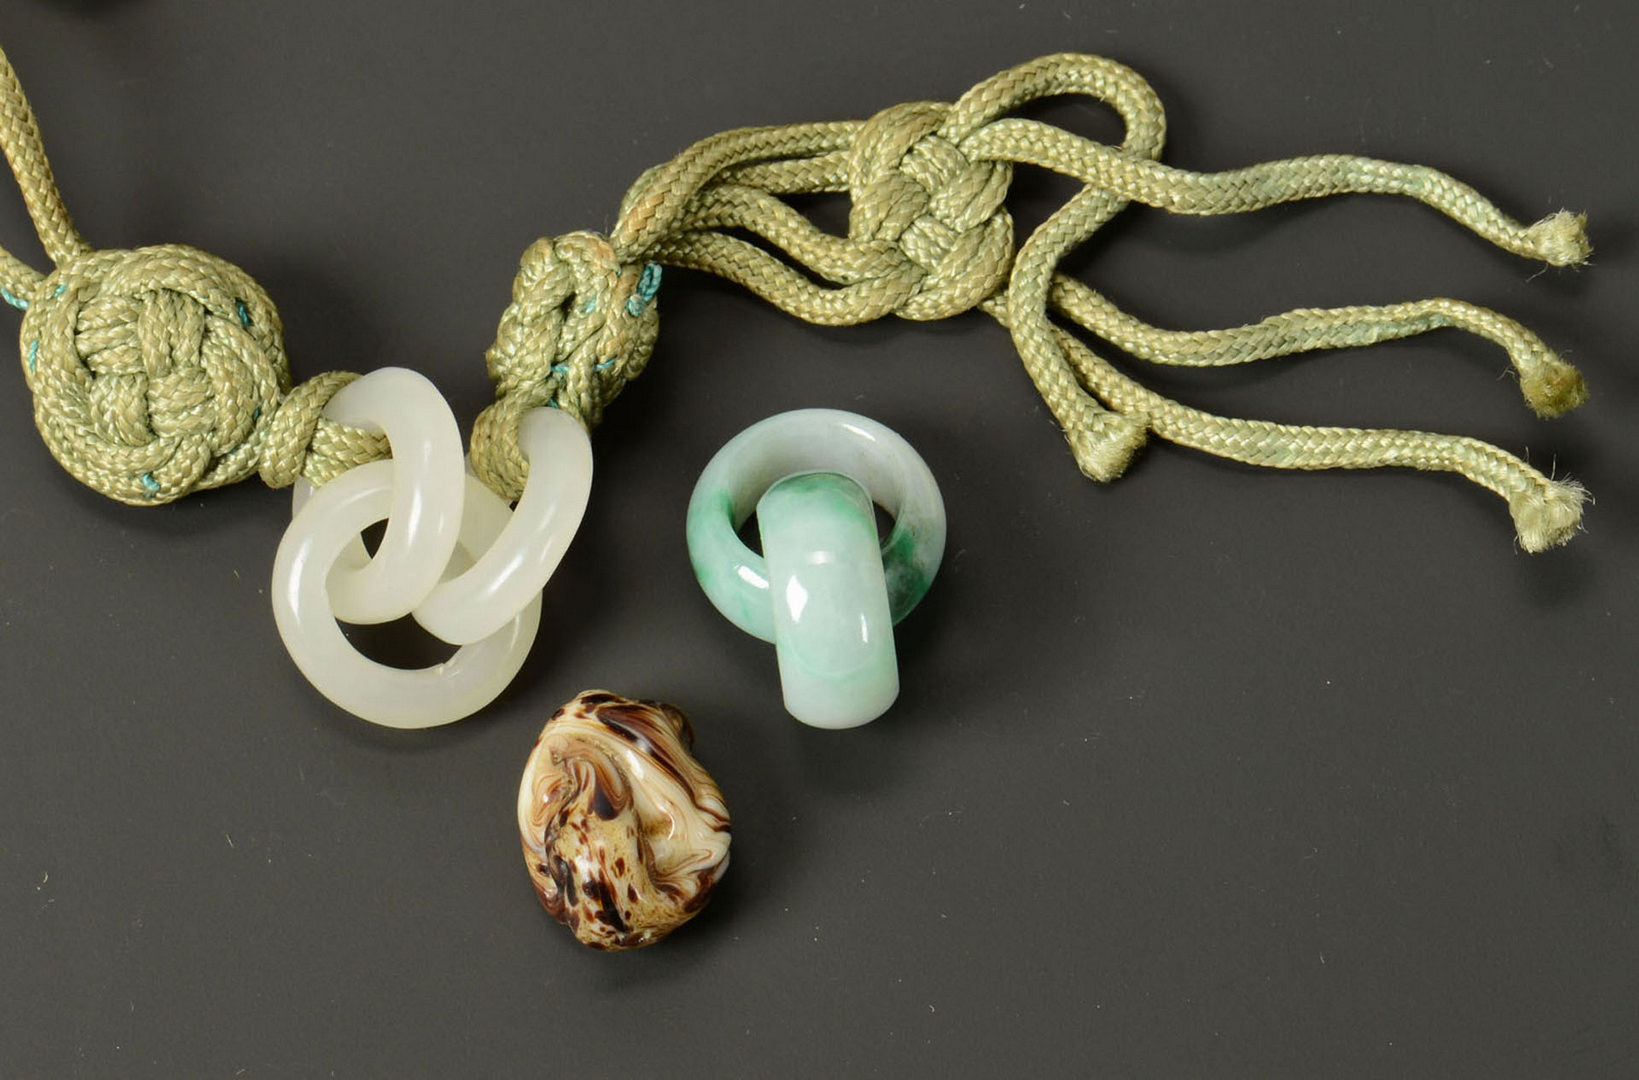 Lot 1: Group of Asian Jewelry Items, Jade, Ivory & Ojime